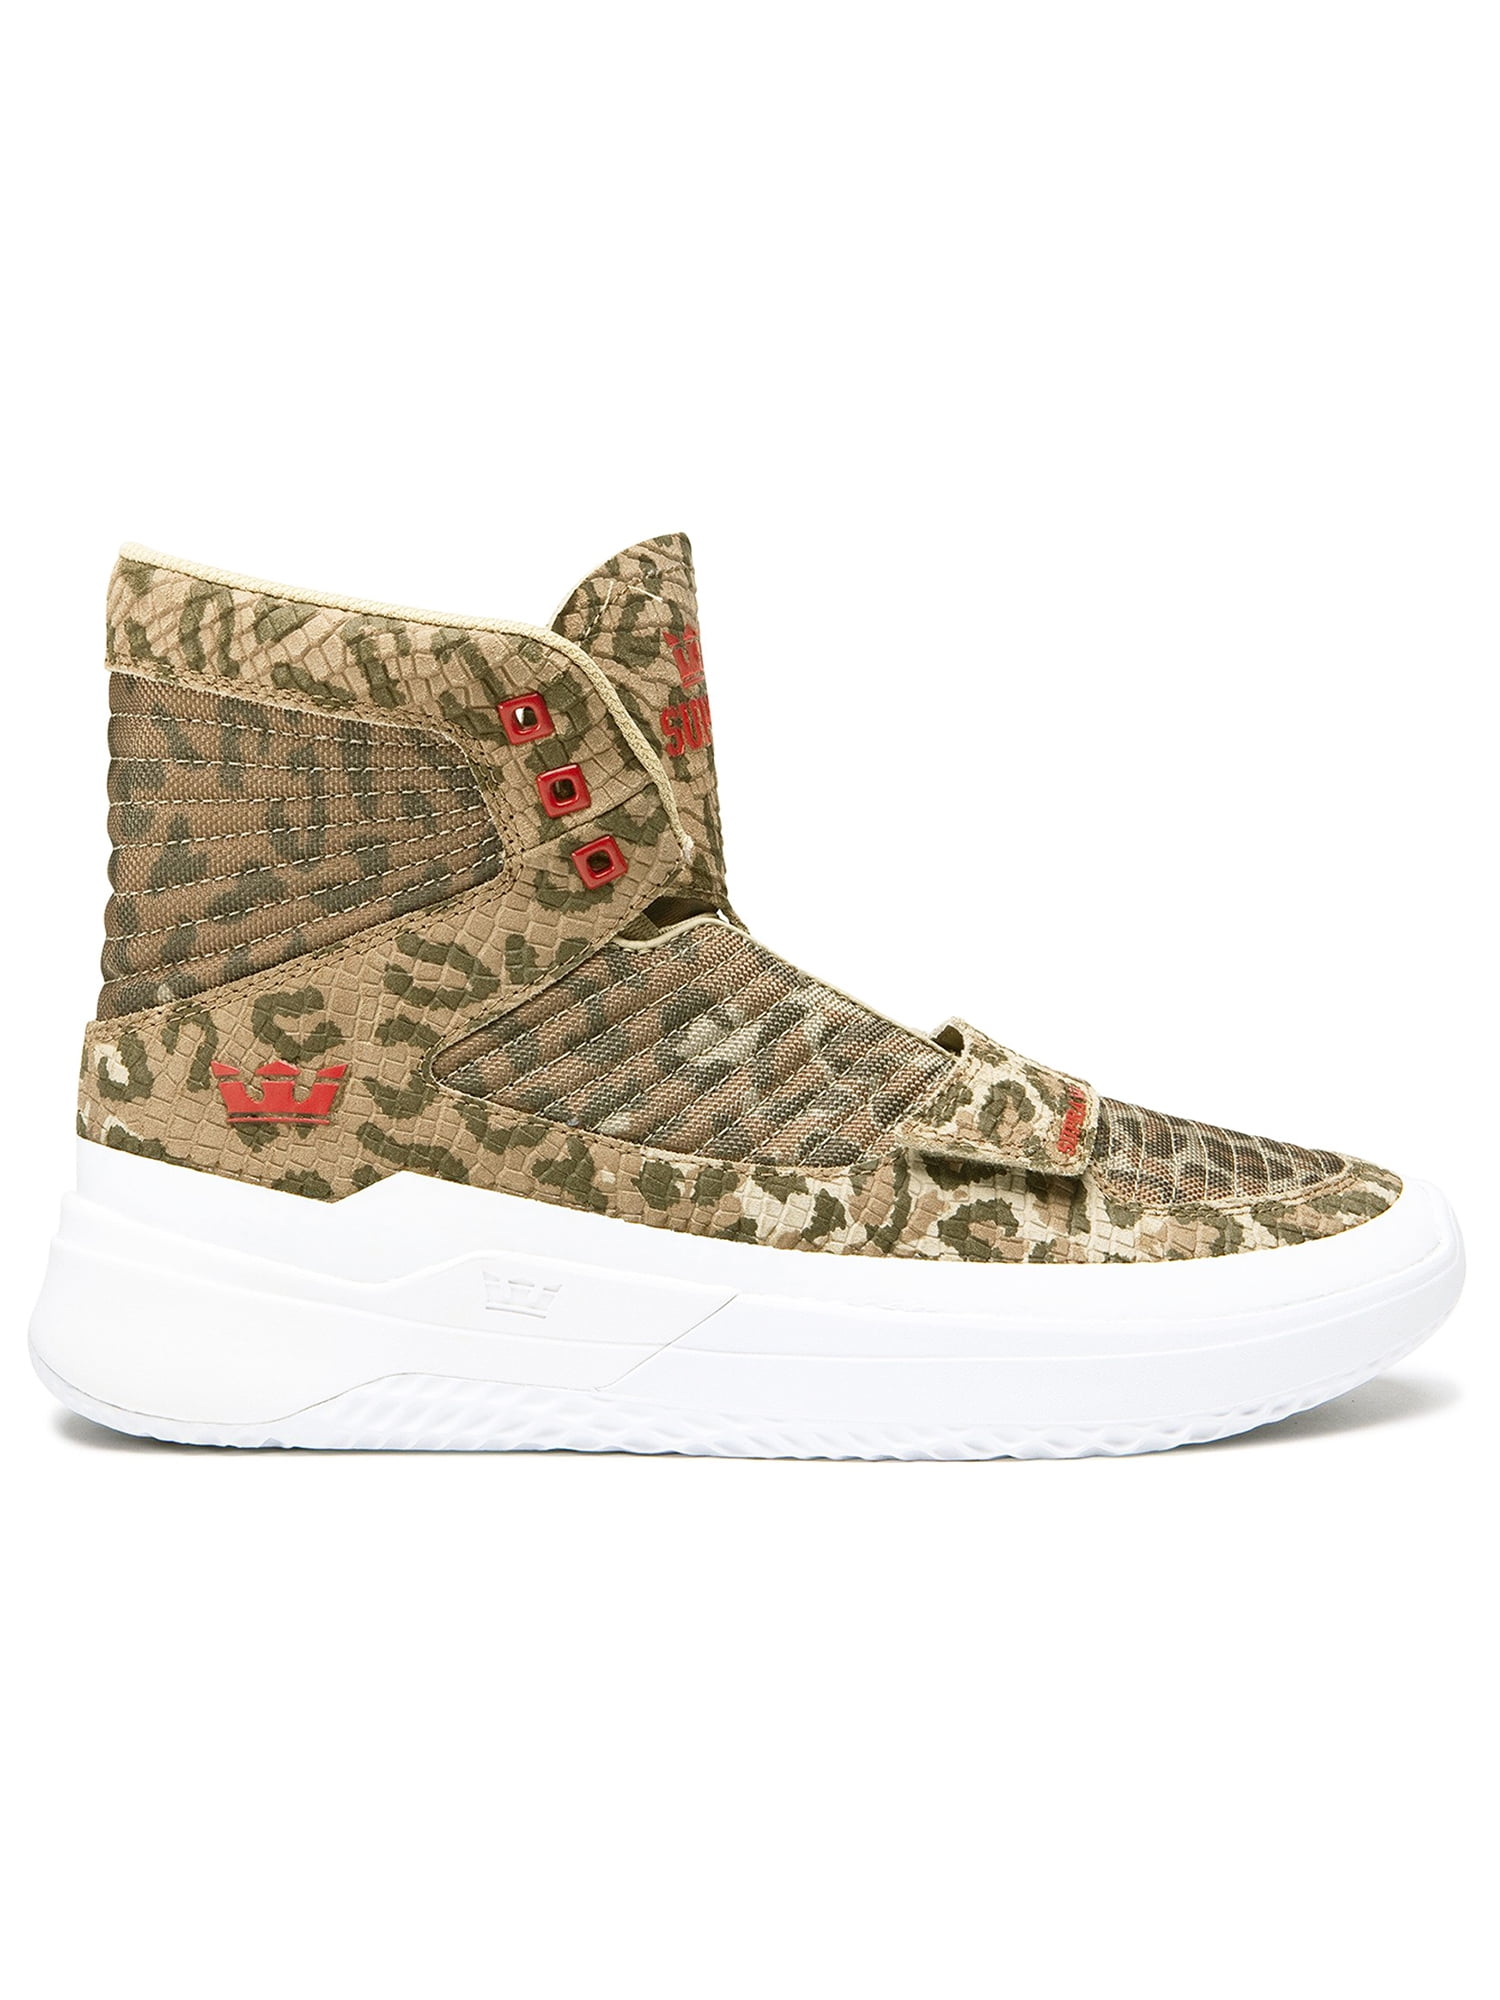 Supra Theory Mens Basketball Sneakers High Top Trainer Shoes Animal ...